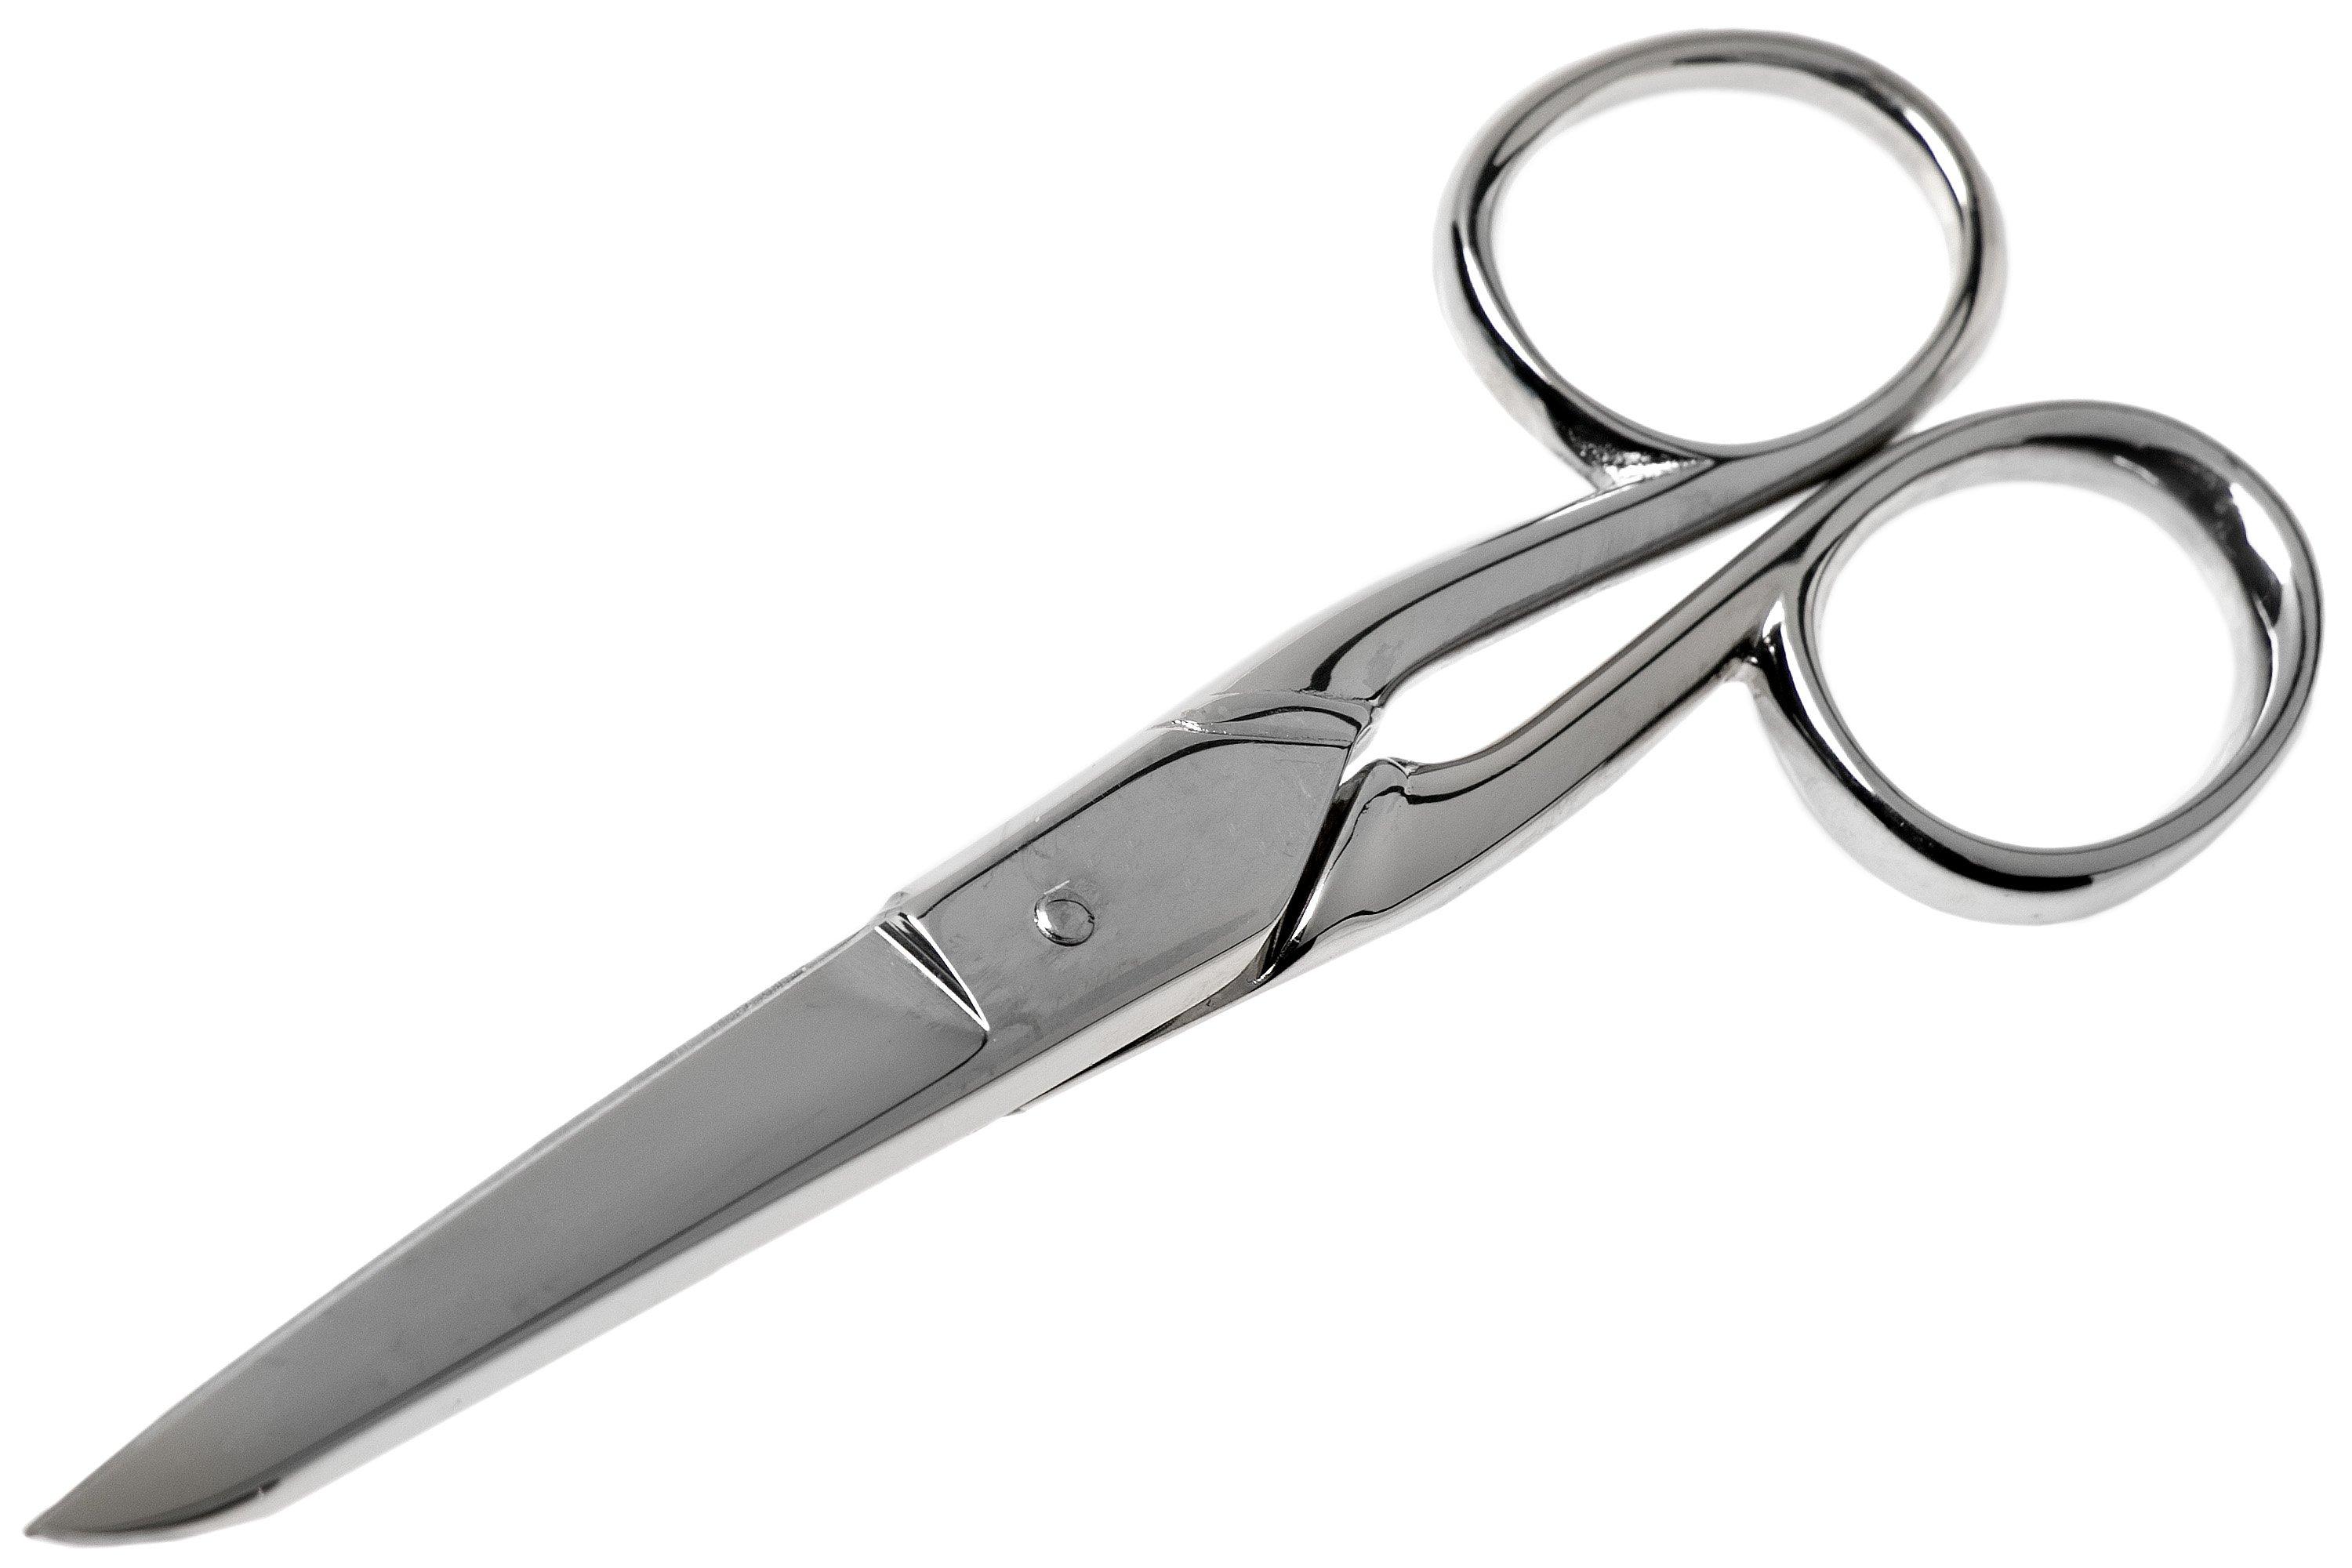 Victorinox France 8.1014.13, 13 cm household scissors | Advantageously  shopping at